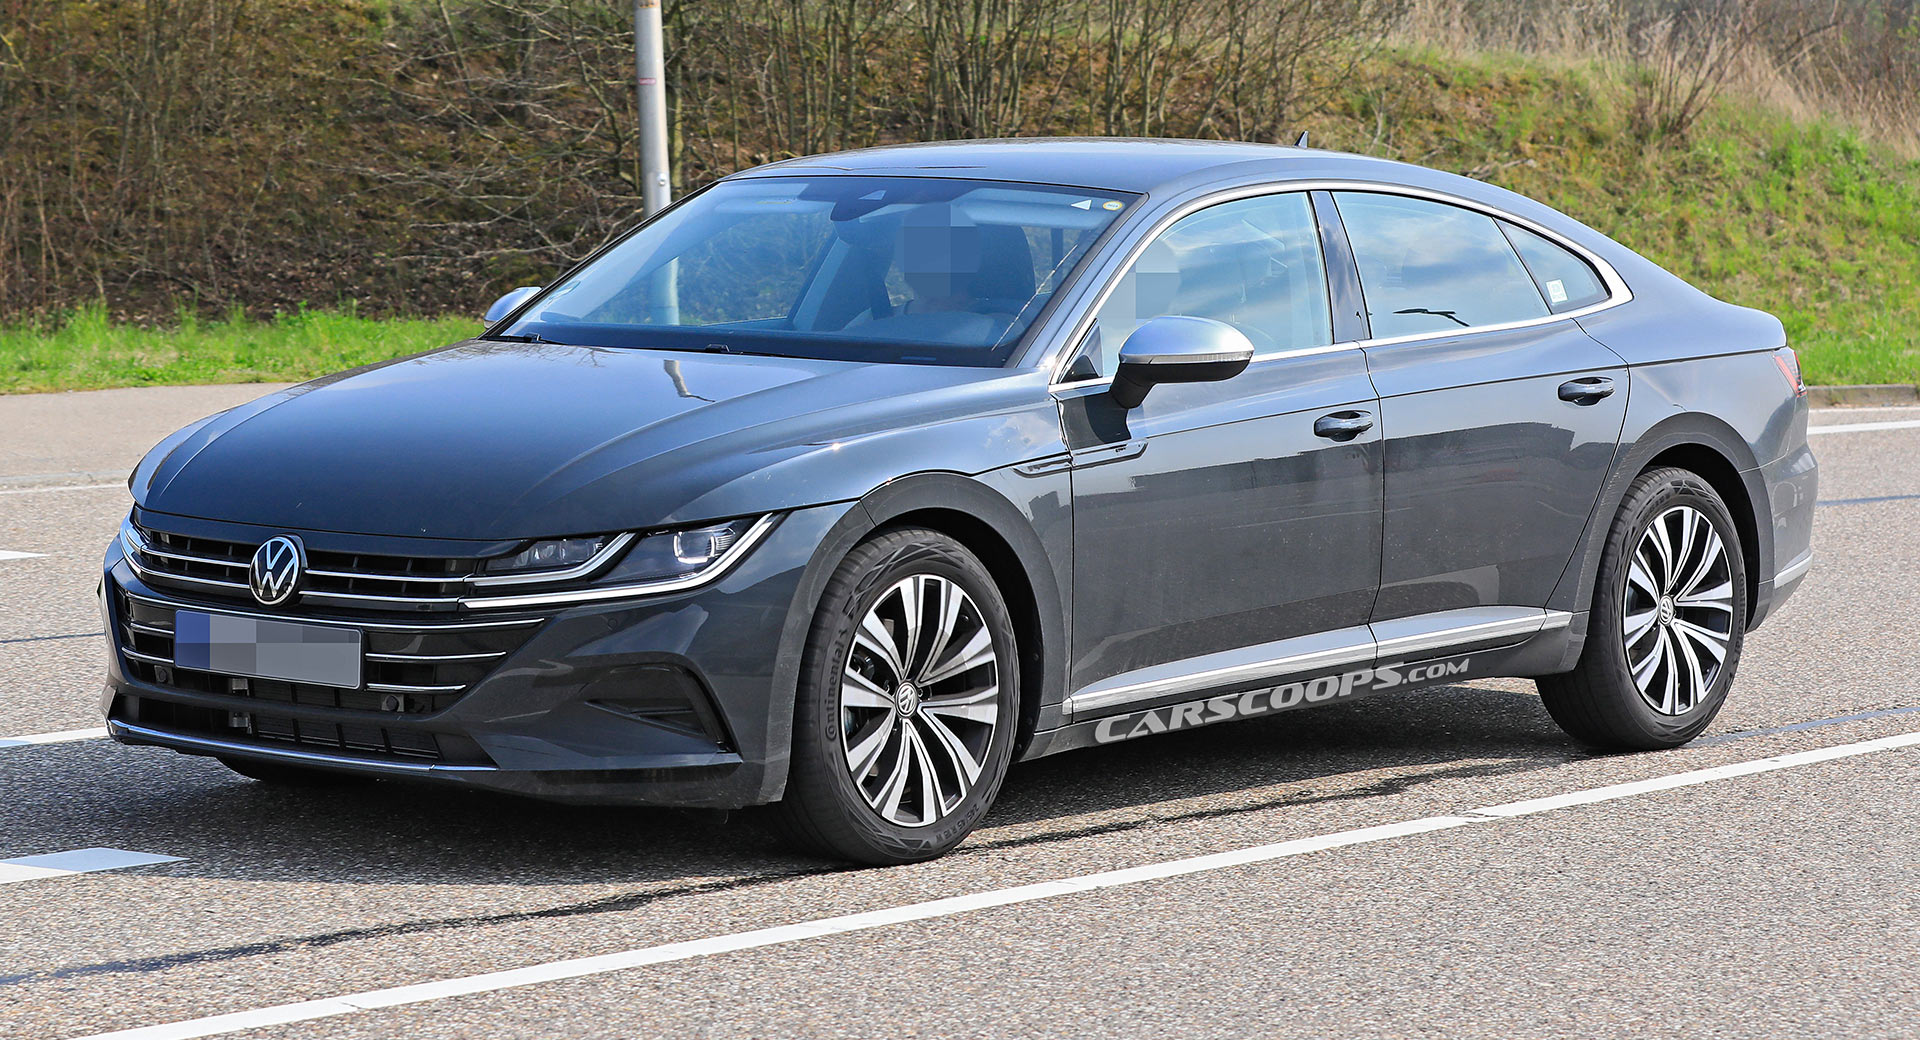 2021 Volkswagen Arteon Facelift Scooped Without Camouflage ...